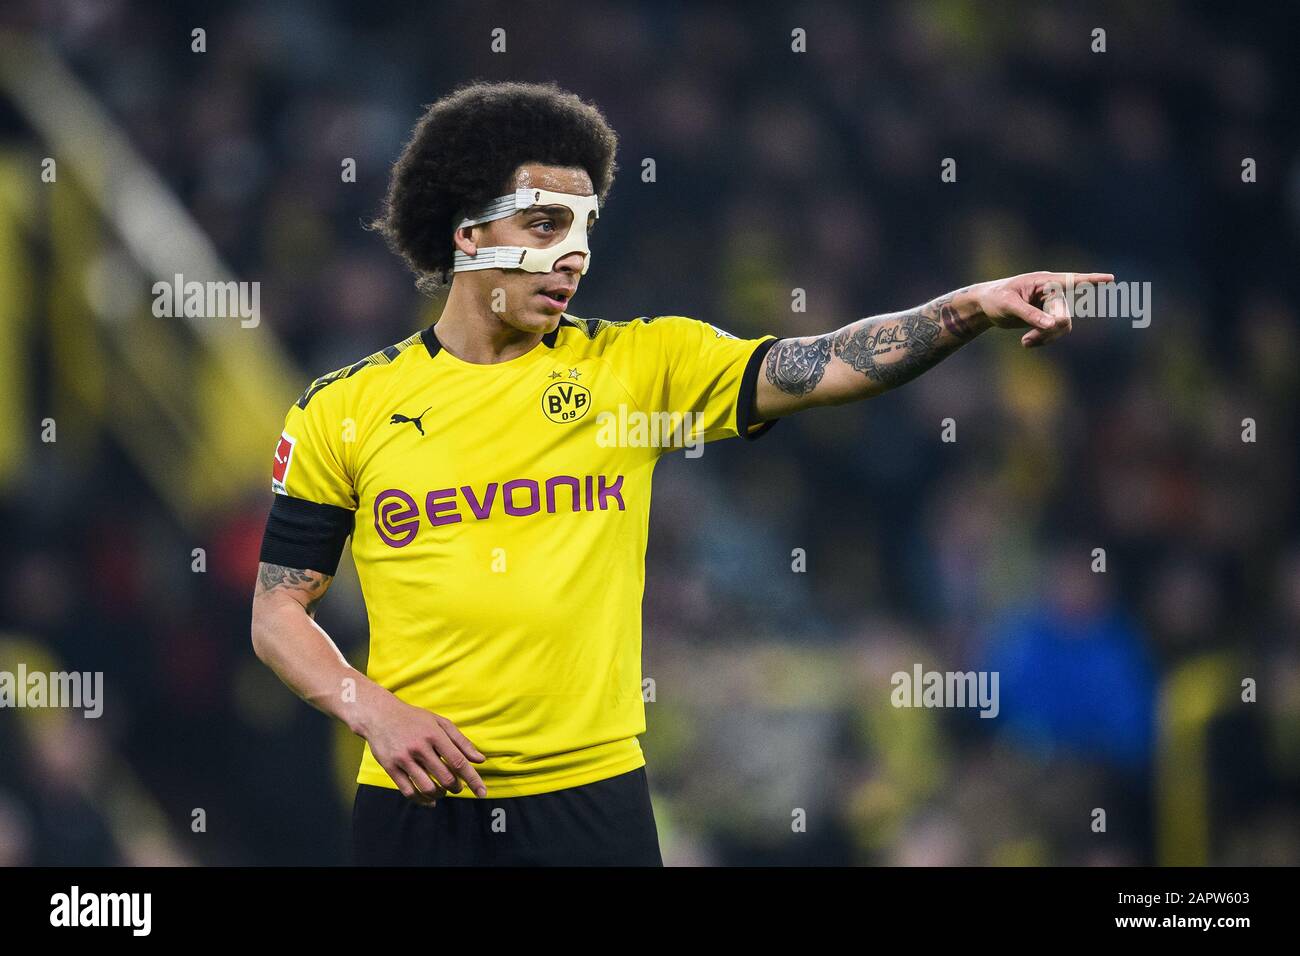 Dortmund, Germany. 24th Jan, 2020. Axel Witsel (Borussia Dortmund). GES/ Fußball/1. Bundesliga: Borussia Dortmund - FC Cologne, 24.01.2020 -  Football/Soccer 1st Division: Borussia Dortmund vs FC Cologne, Dortmund,  Jan 24, 2020 - DFL